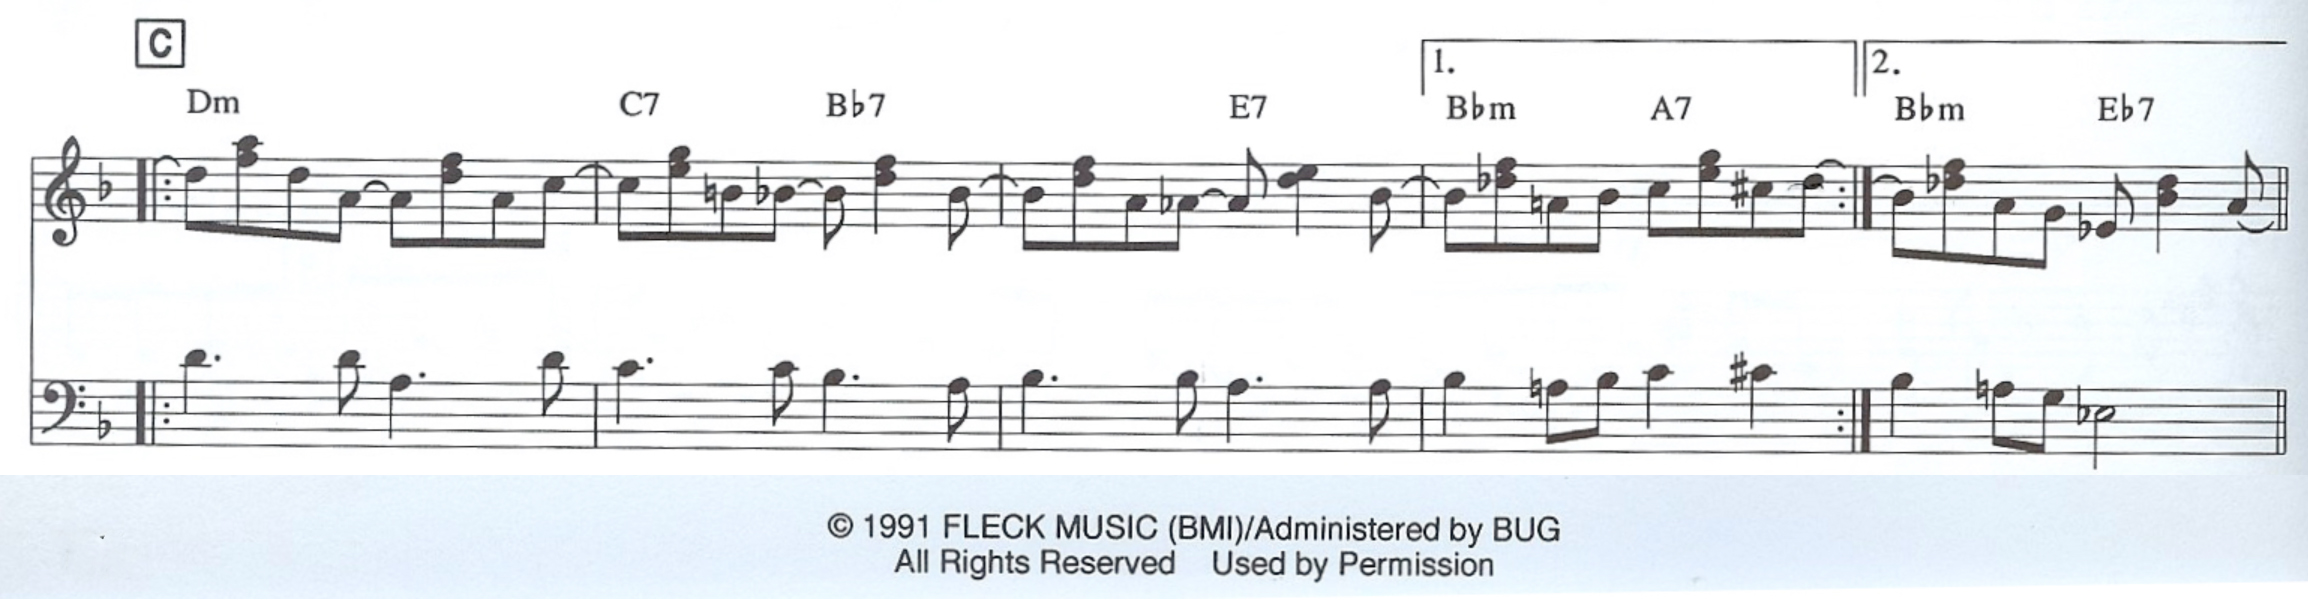 excerpt from the leadsheet (in staff notation) of Béla Fleck's composition 